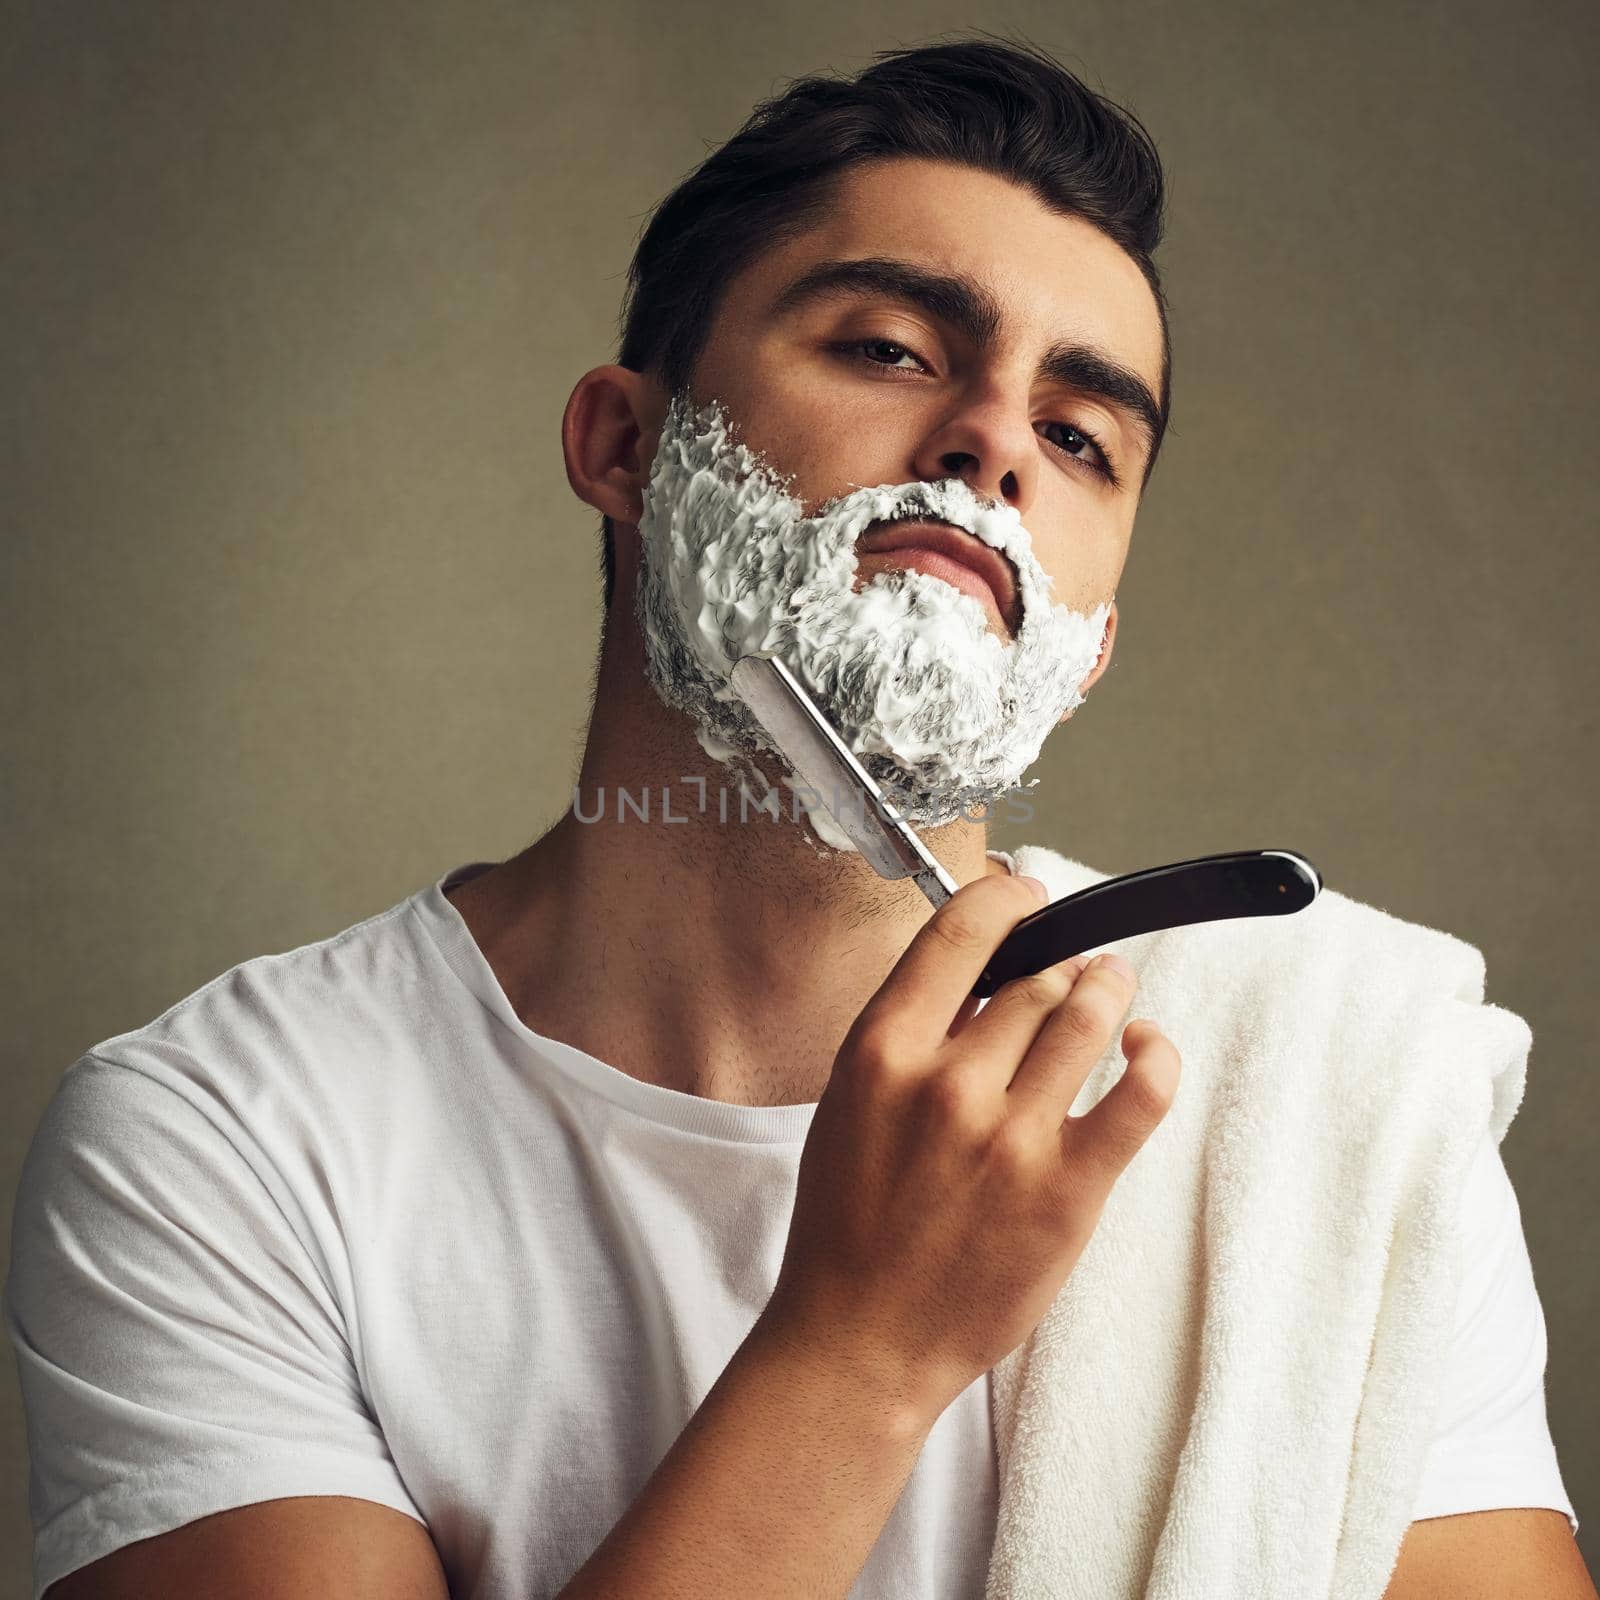 Cropped shot of a handsome young man shaving with a straight razor.